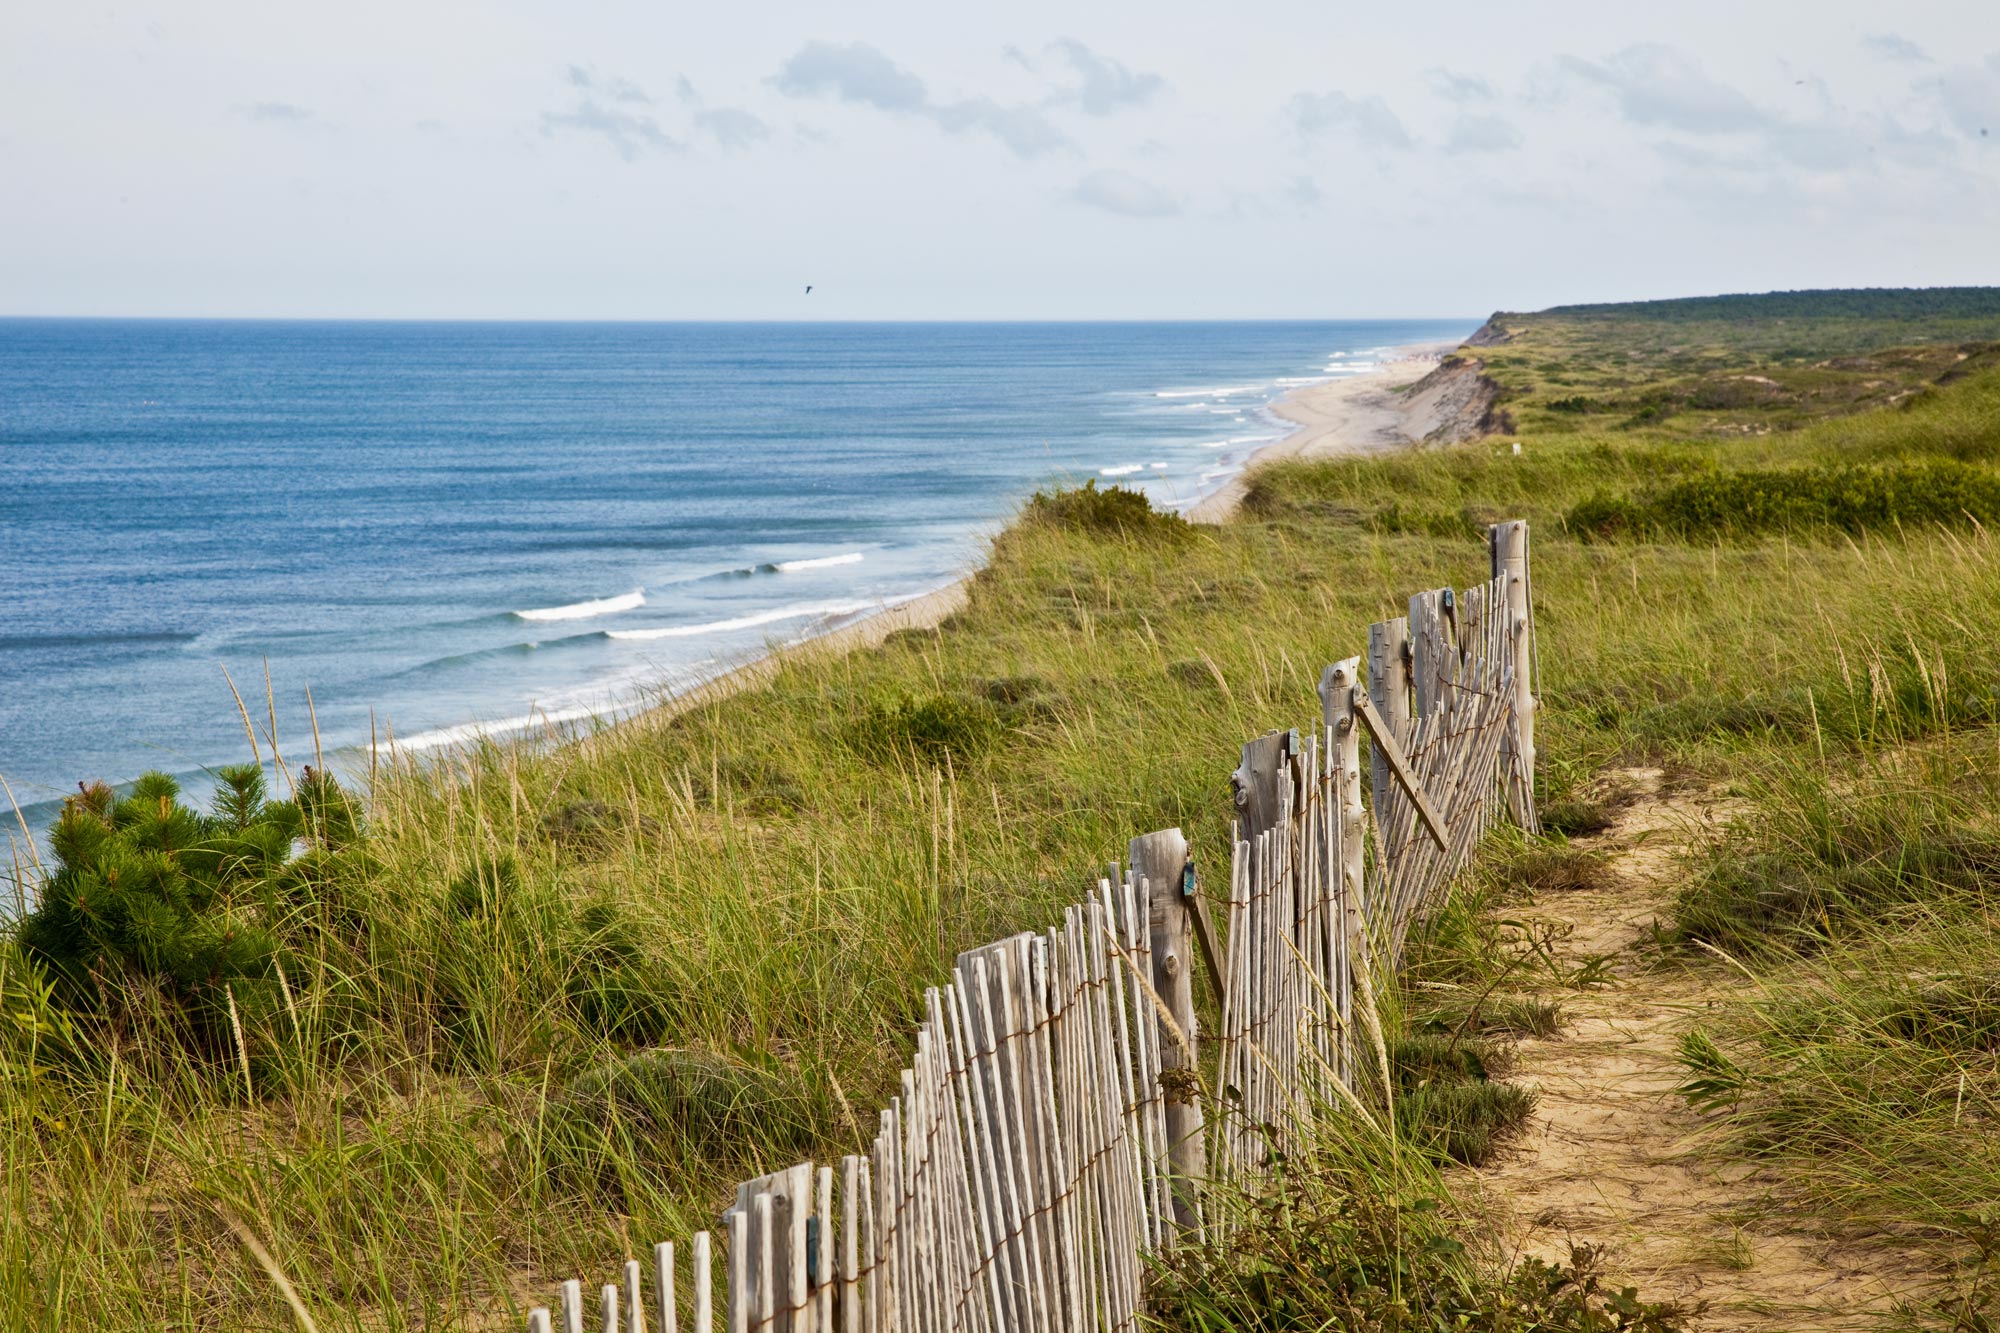 Panoramic view of grassy dunes and old fence on the beach